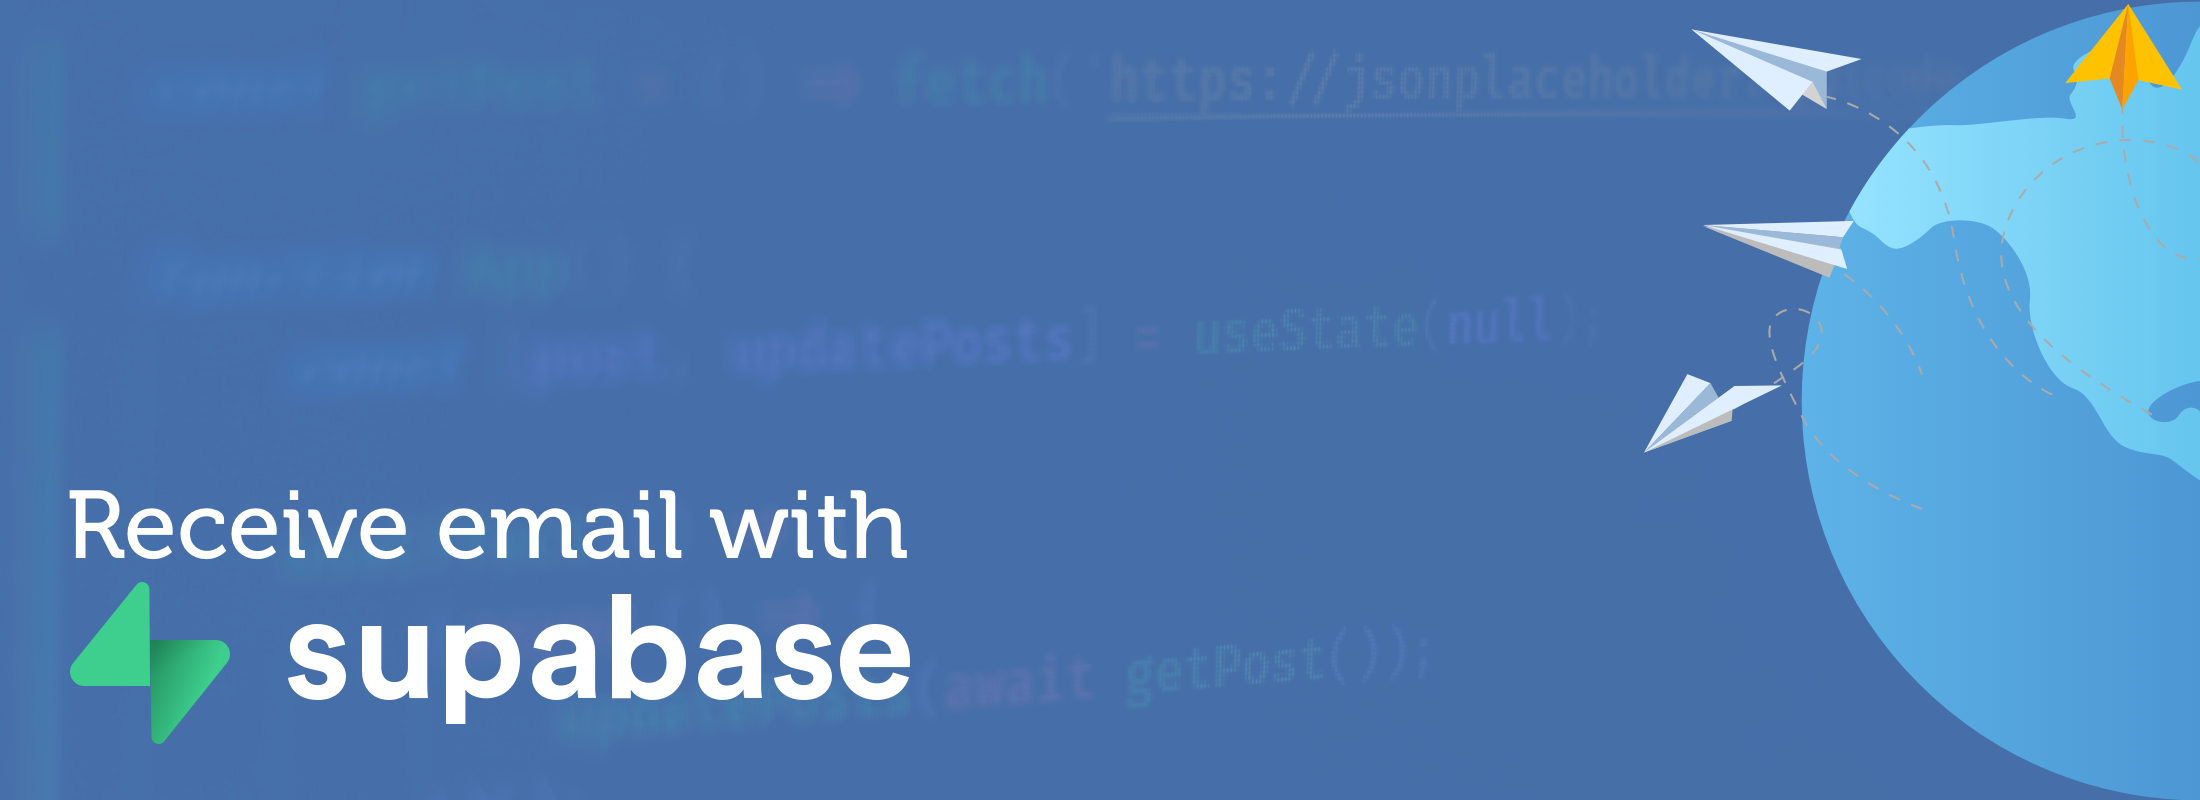 Header Image How to Receive Email with Supabase and Typescript